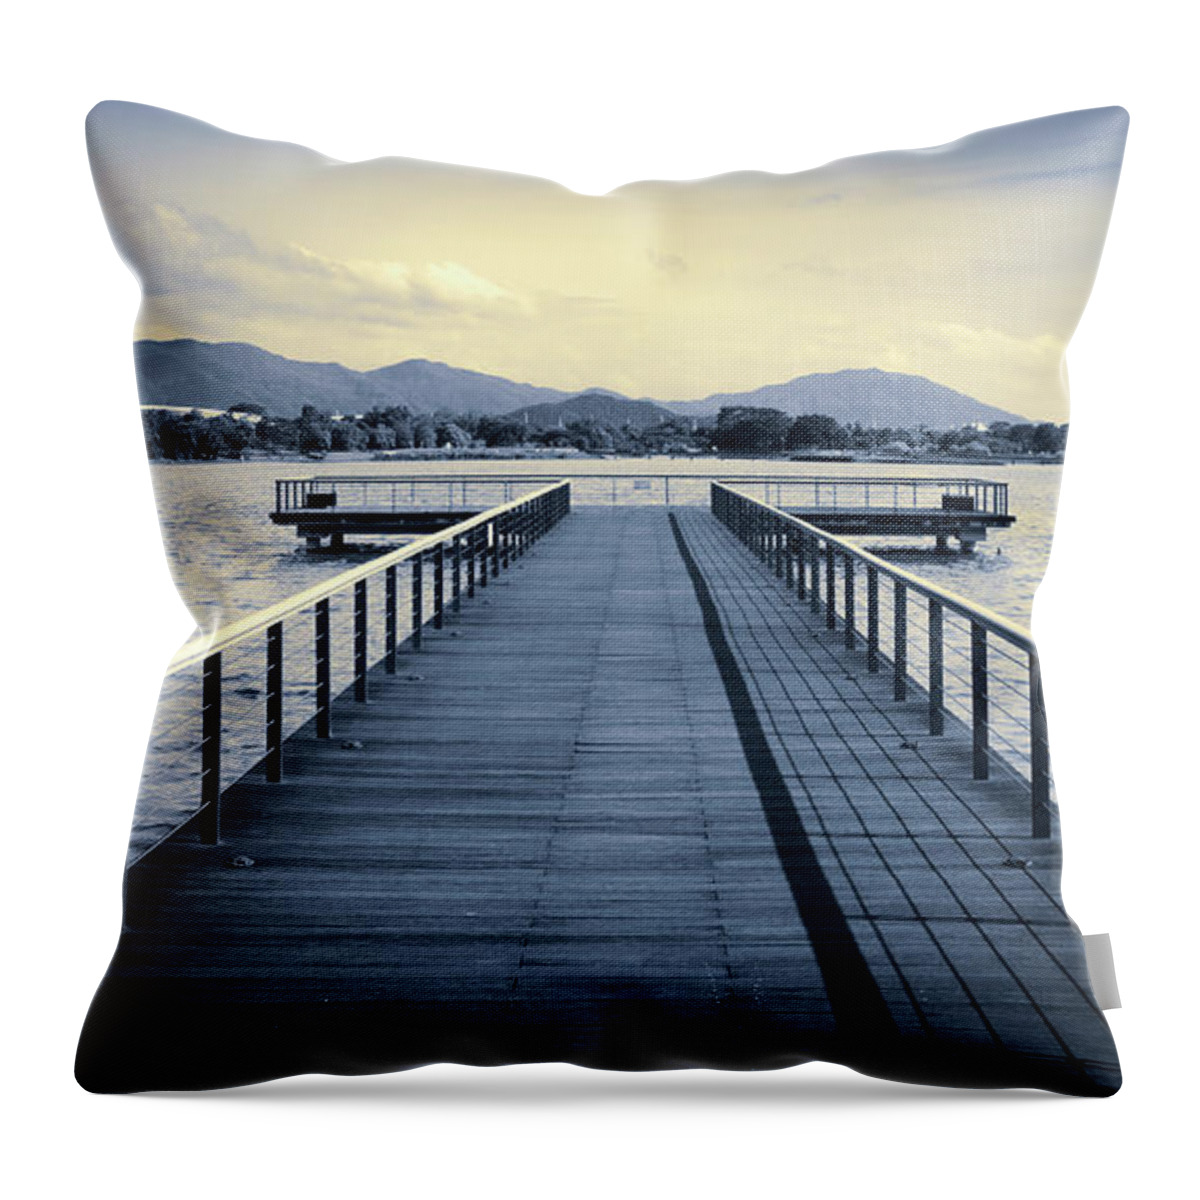 Perspective Throw Pillow featuring the photograph The Place To Contemplate st. 1 by Andrii Maykovskyi